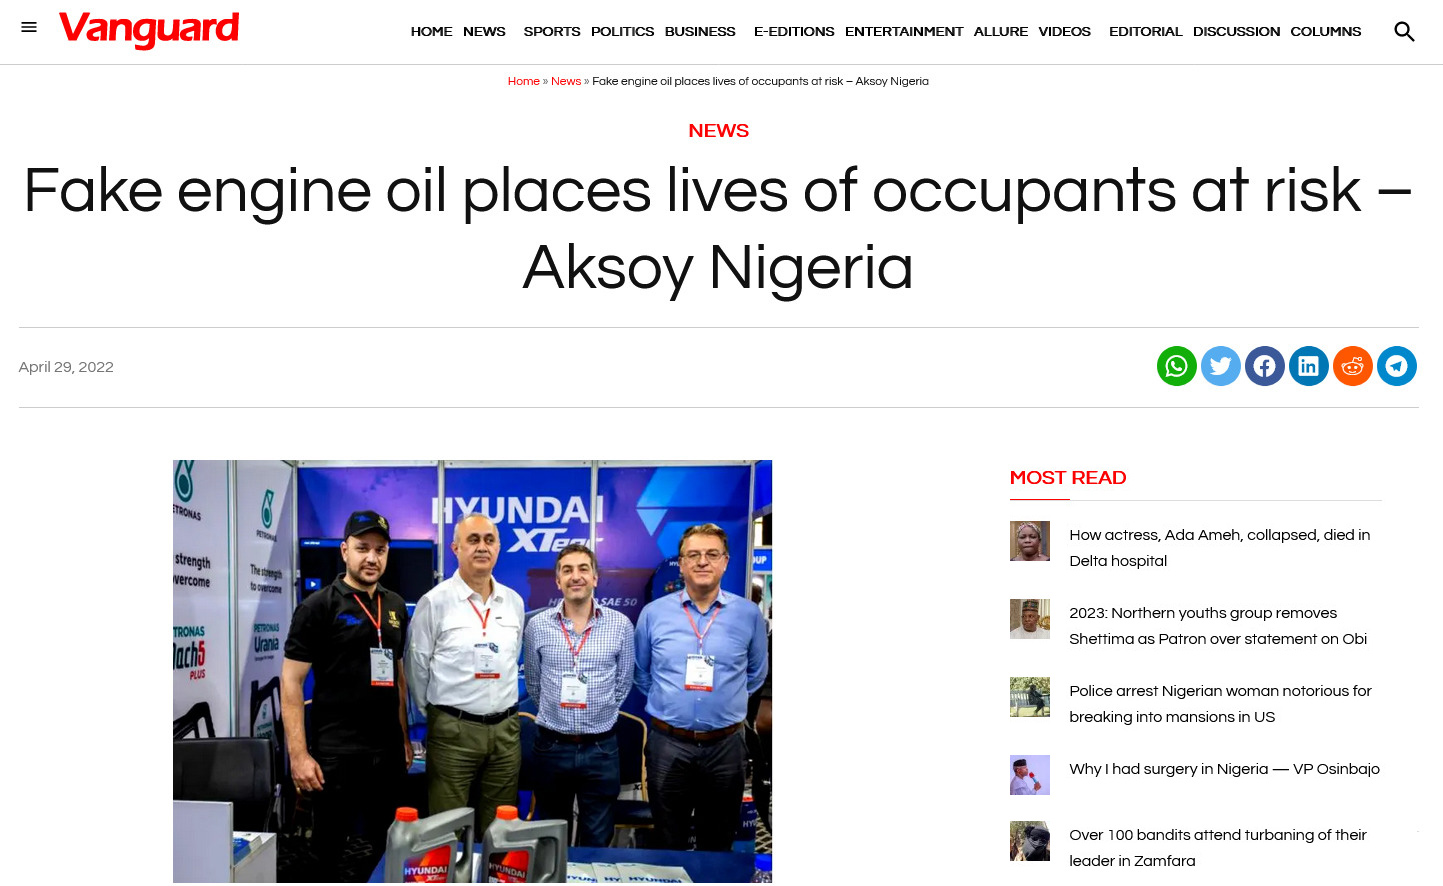 Fake Engine Oil Places Lives of Occupants at Risk – Aksoy Nigeria